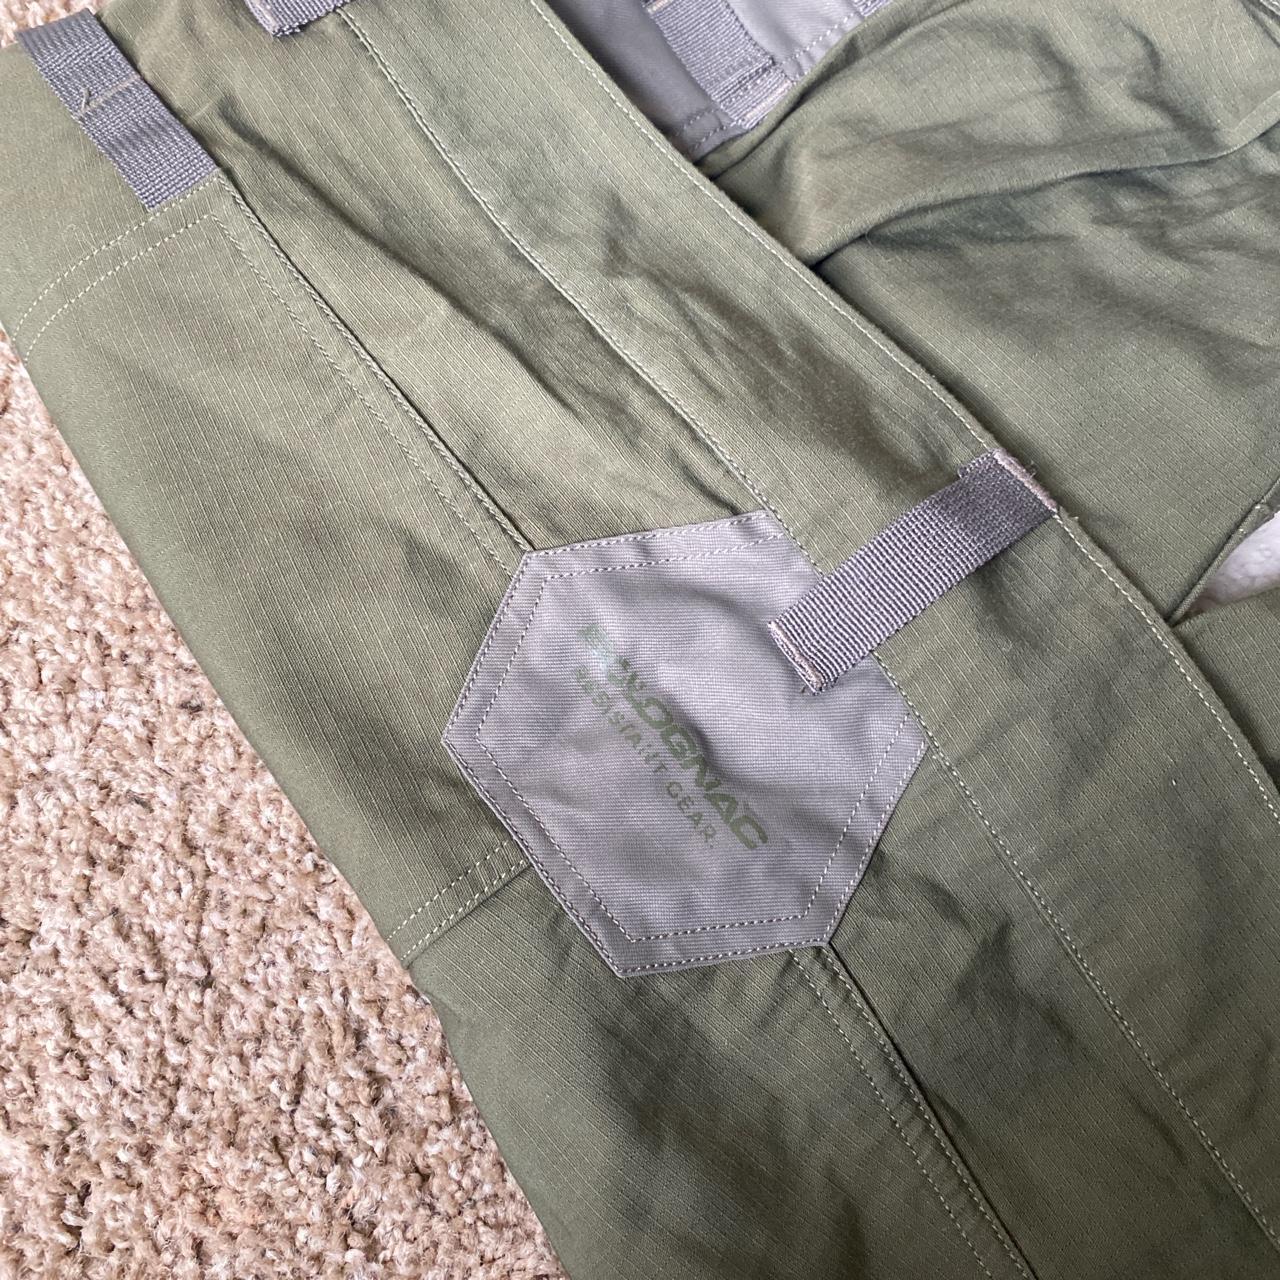 Product Image 4 - Army green Cargo Pants❤️‍🔥

These are